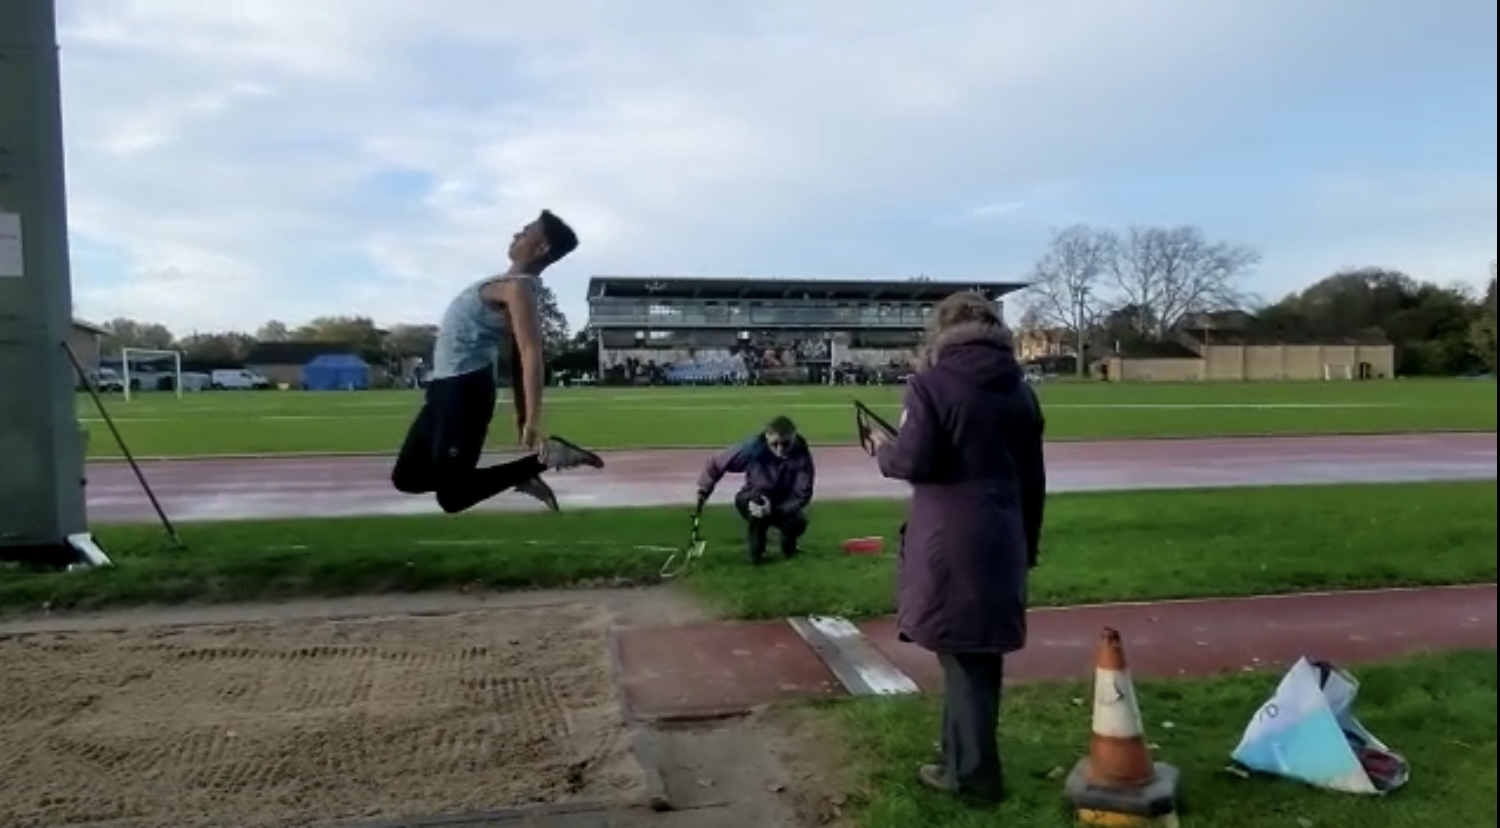 A man completing a long jump in the air over a sandpit